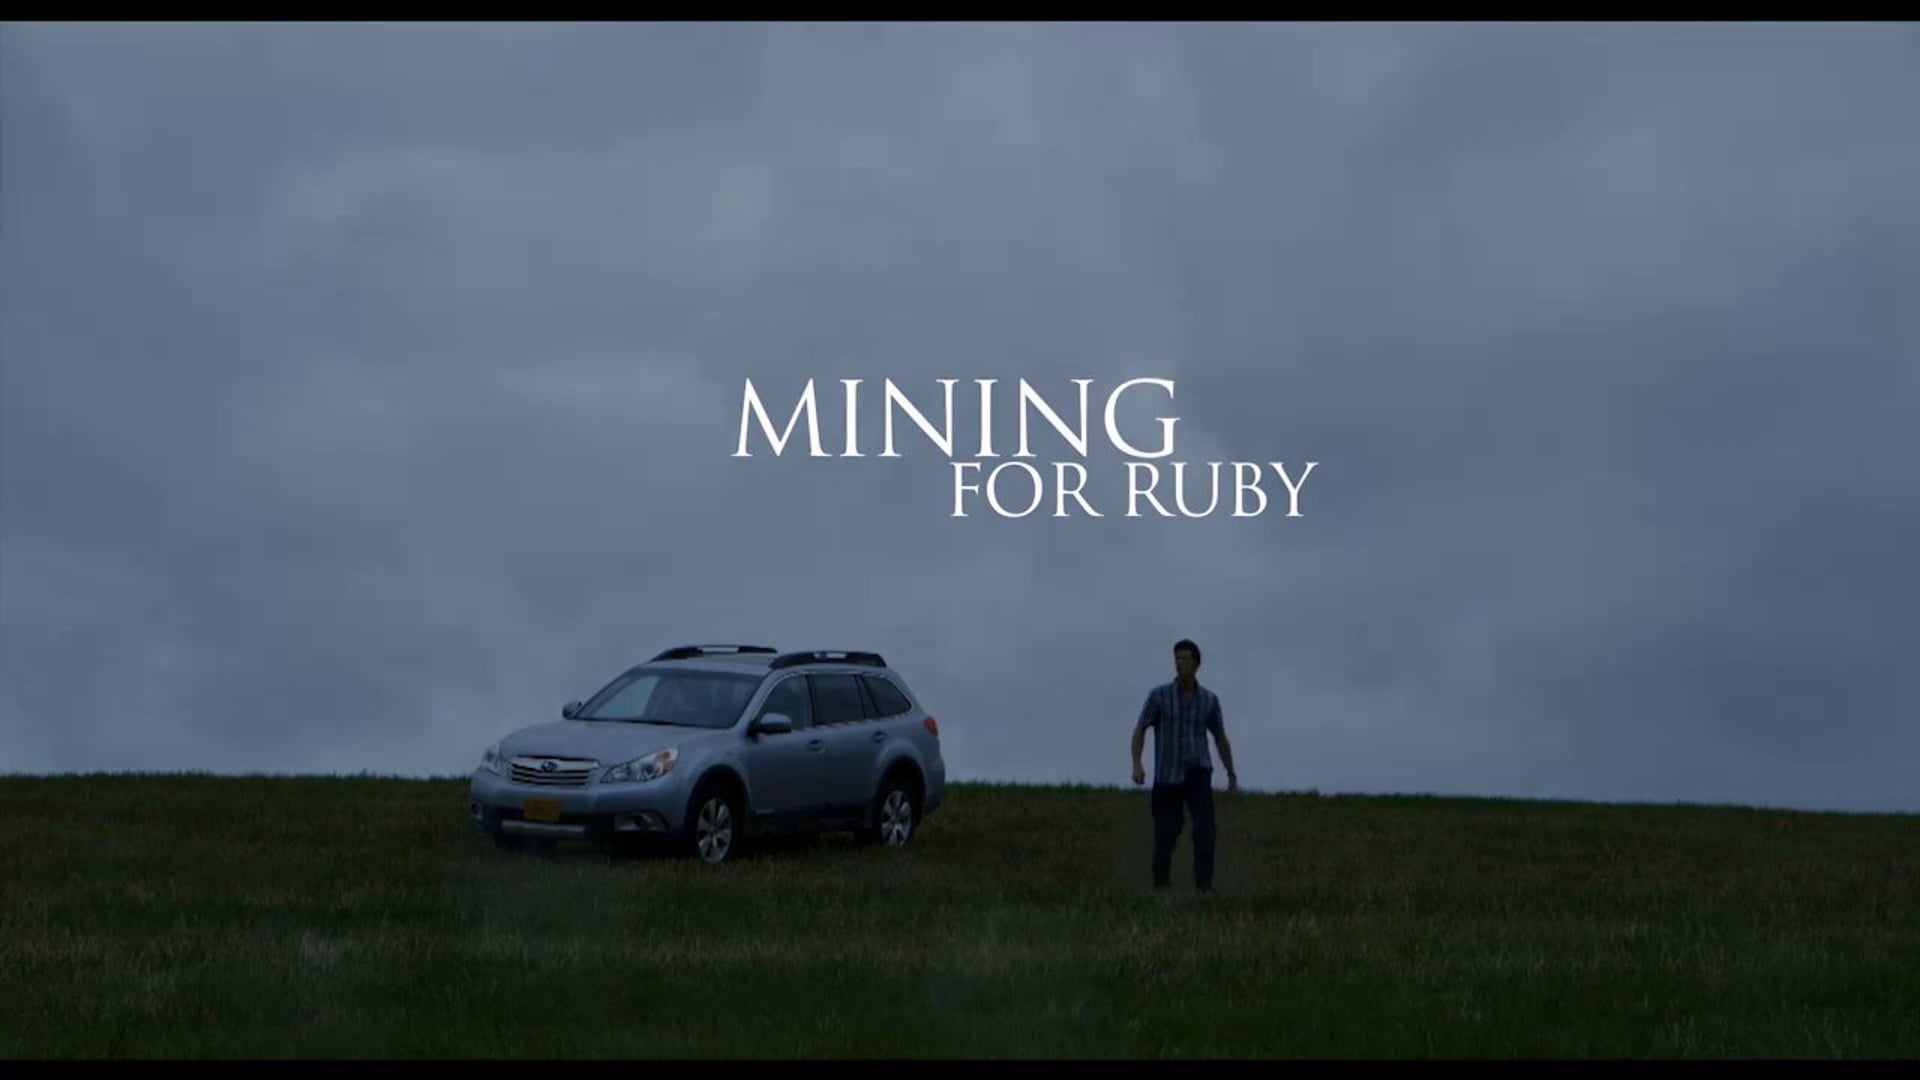 TRAILER - "Mining for Ruby" (a.k.a "Finding Love in Alaska")